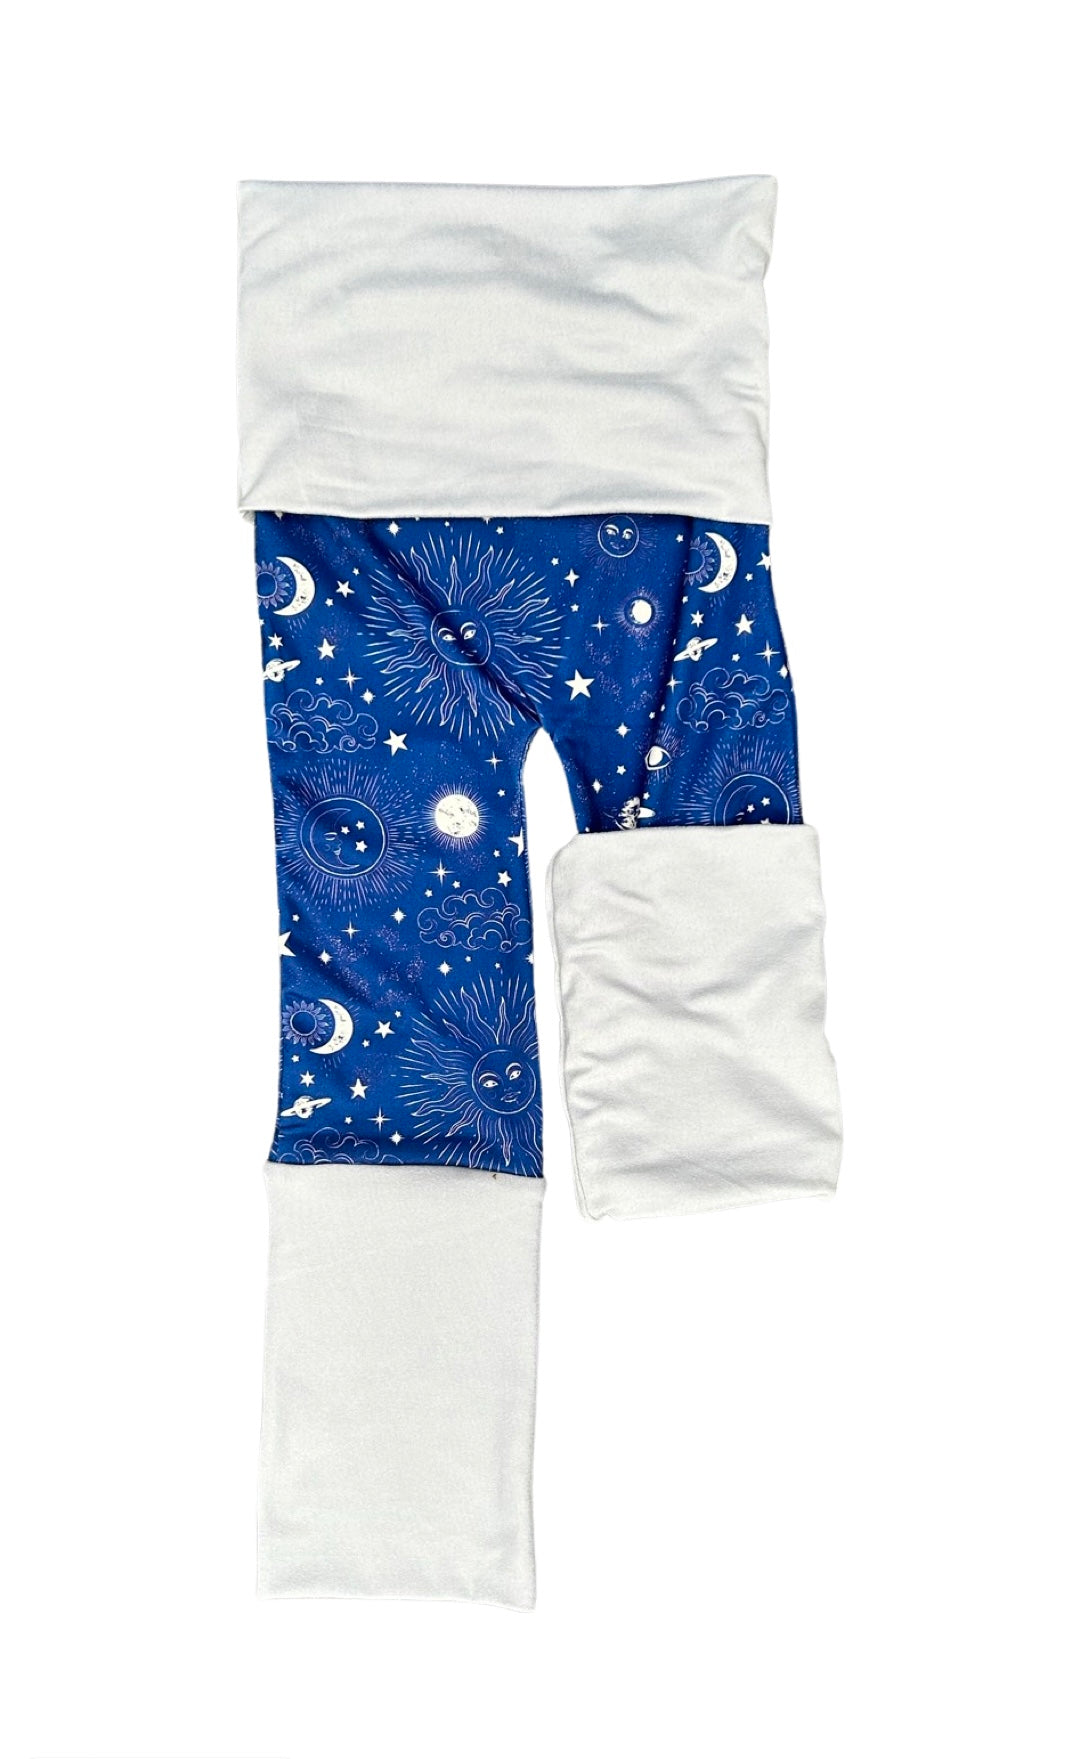 Adjustable Pants - Celestial with Gray